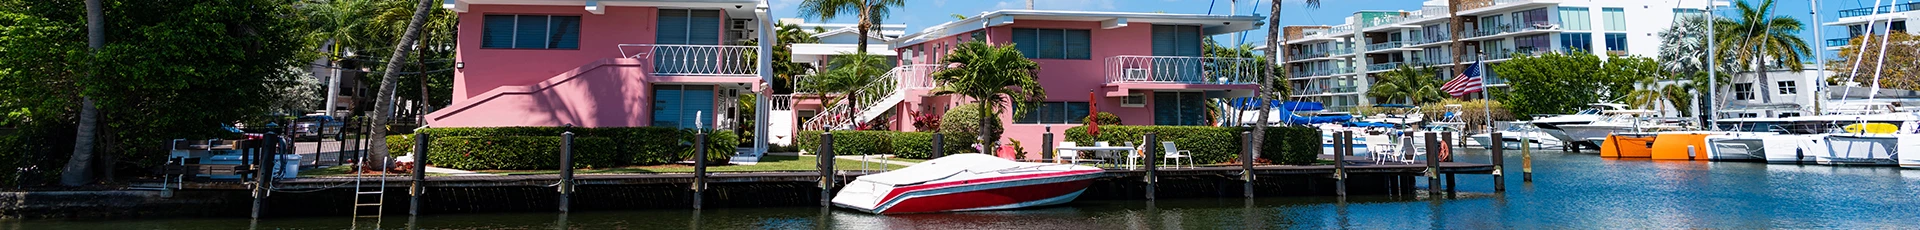 Boat Removal, Dismantle and Disposal in Ridgecrest Florida